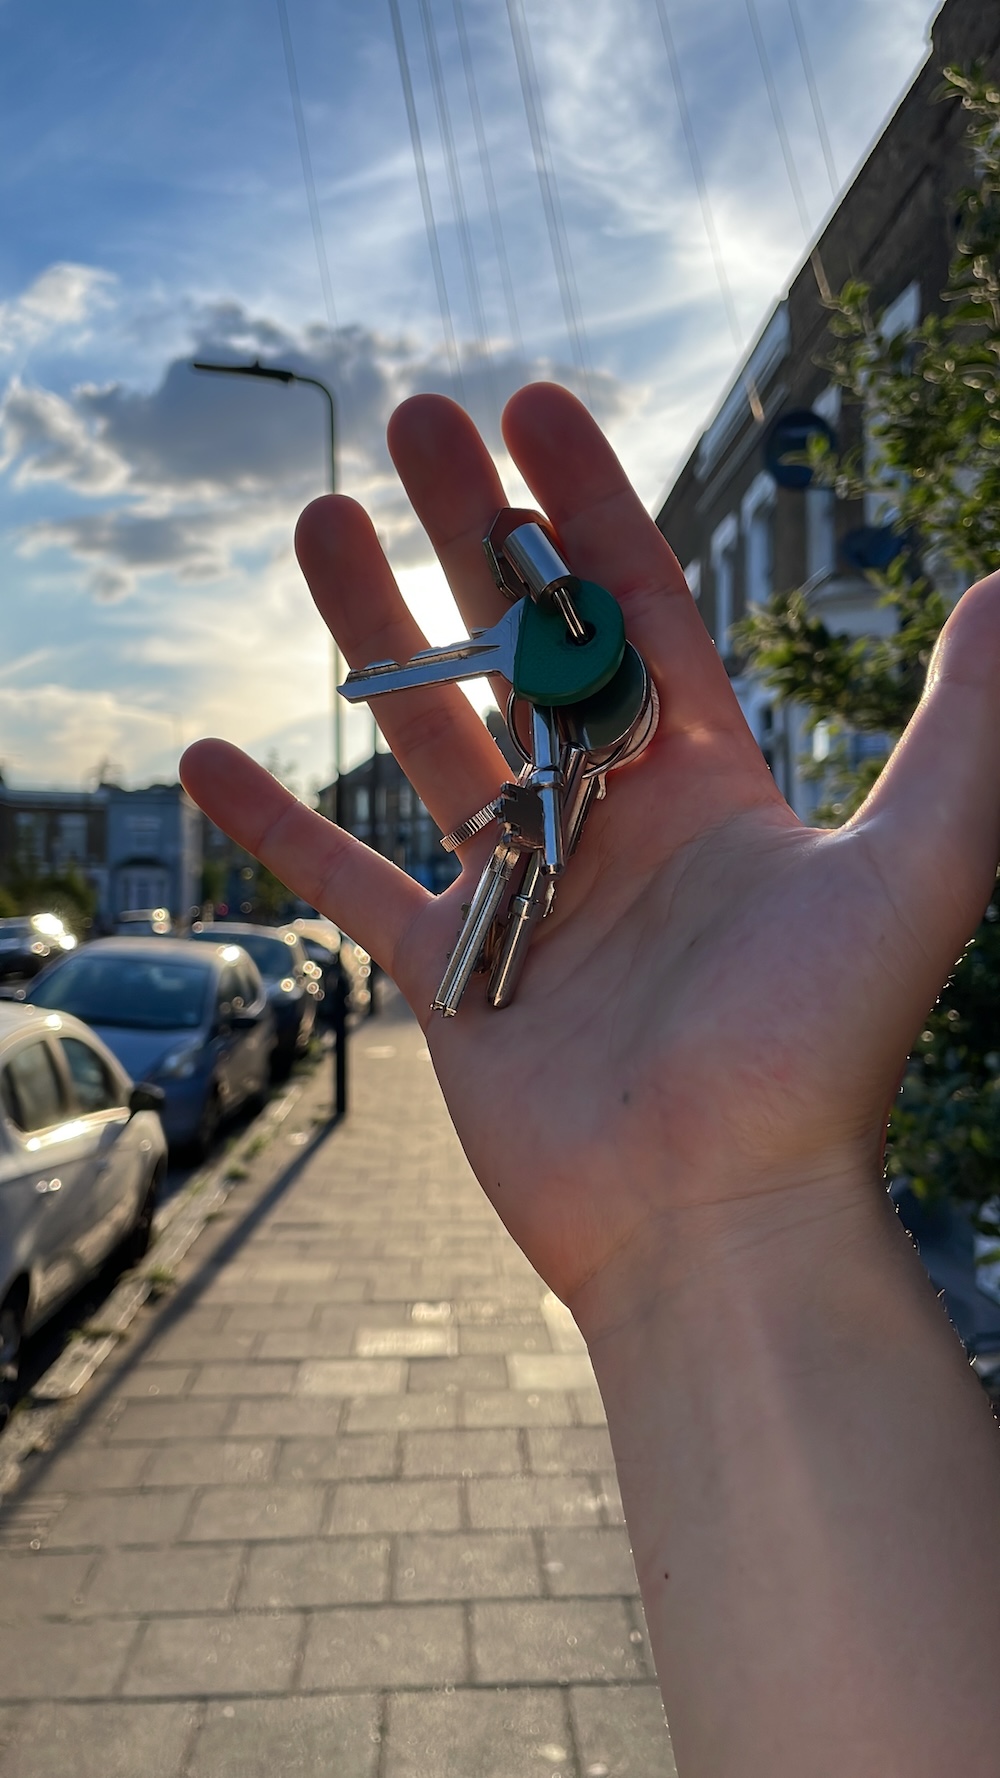 Keys to my first flat in London. I guess you gotta celebrate small wins.